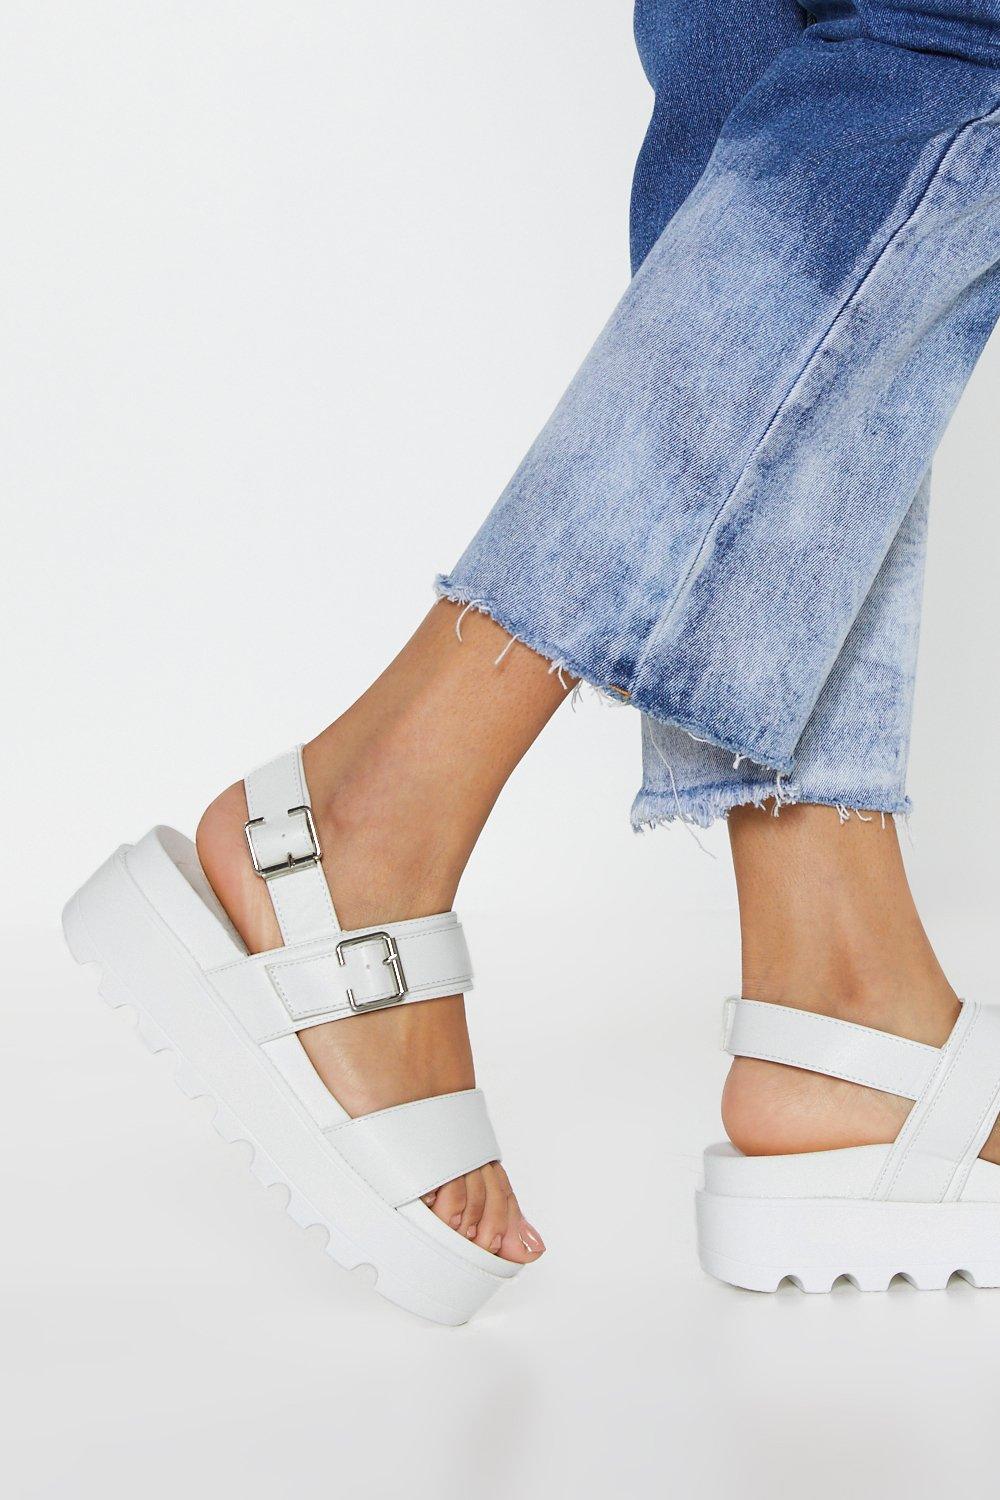 chunky boots asos